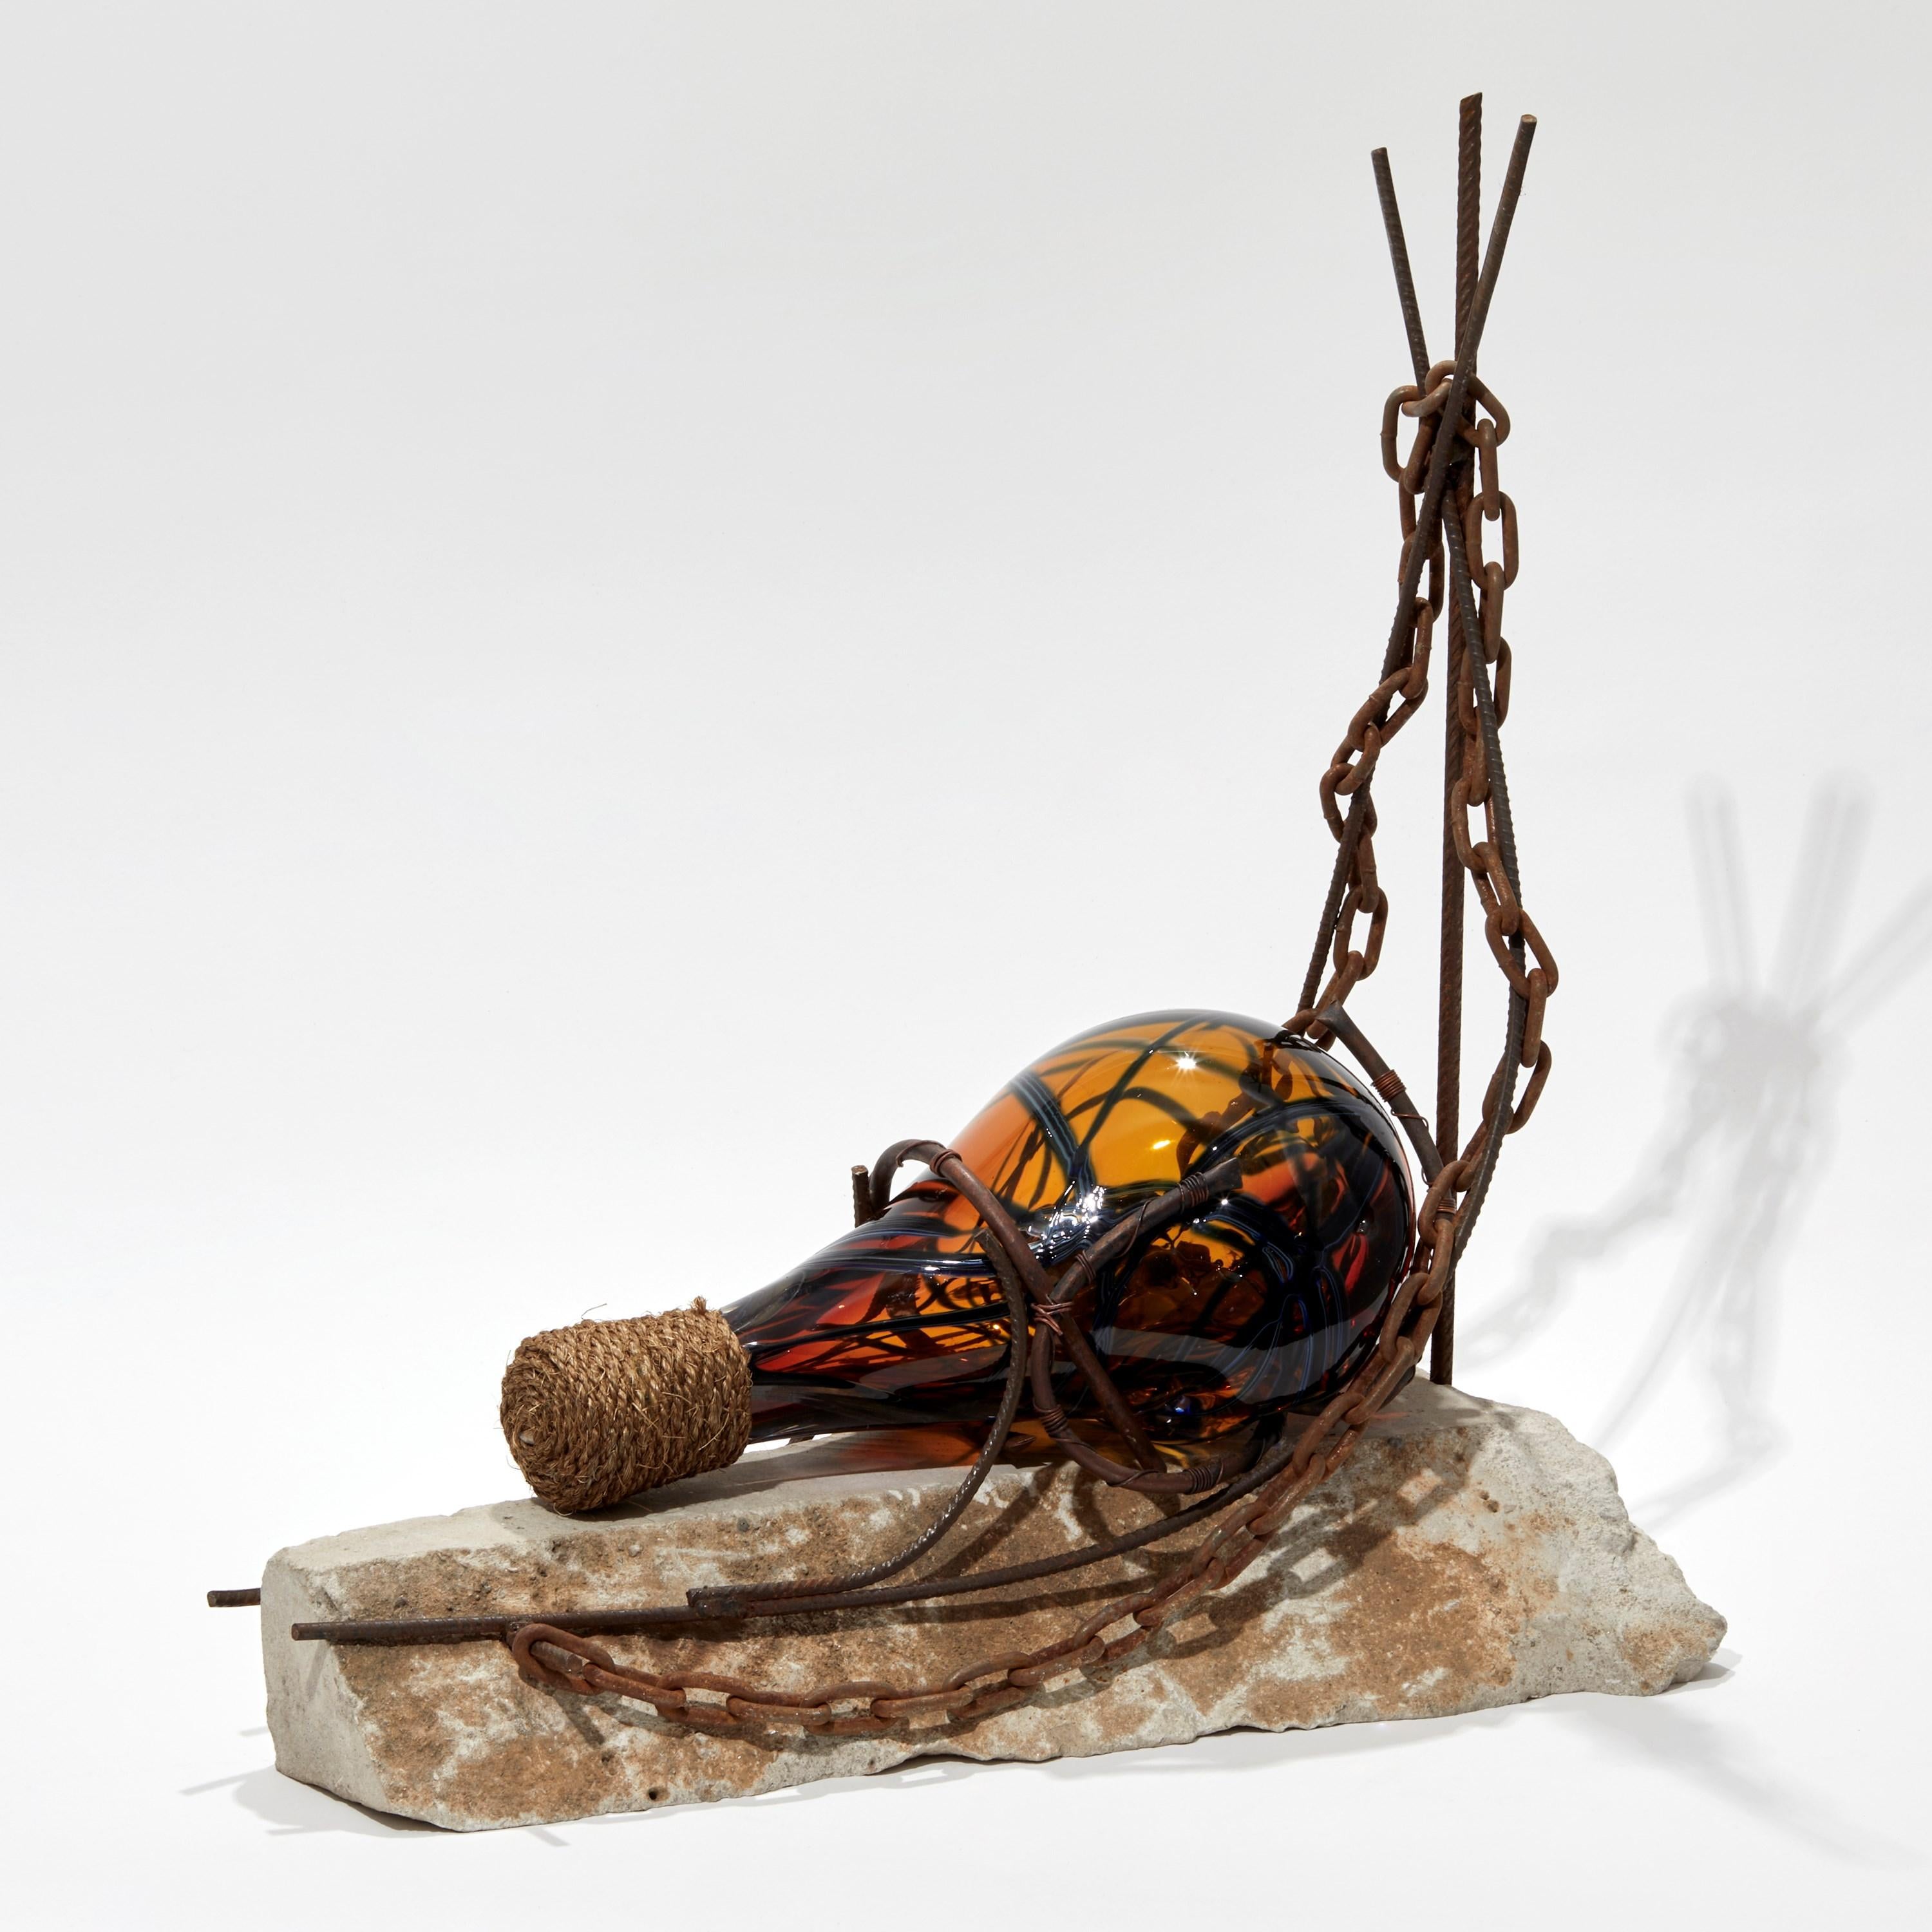 'Message in a Bottle' is a unique sculpture by the British artist, Chris Day, created from handblown and sculpted glass, micro bore copper pipe, copper wire, steel rebar, chain and reclaimed limestone.

This artwork was created as part of the